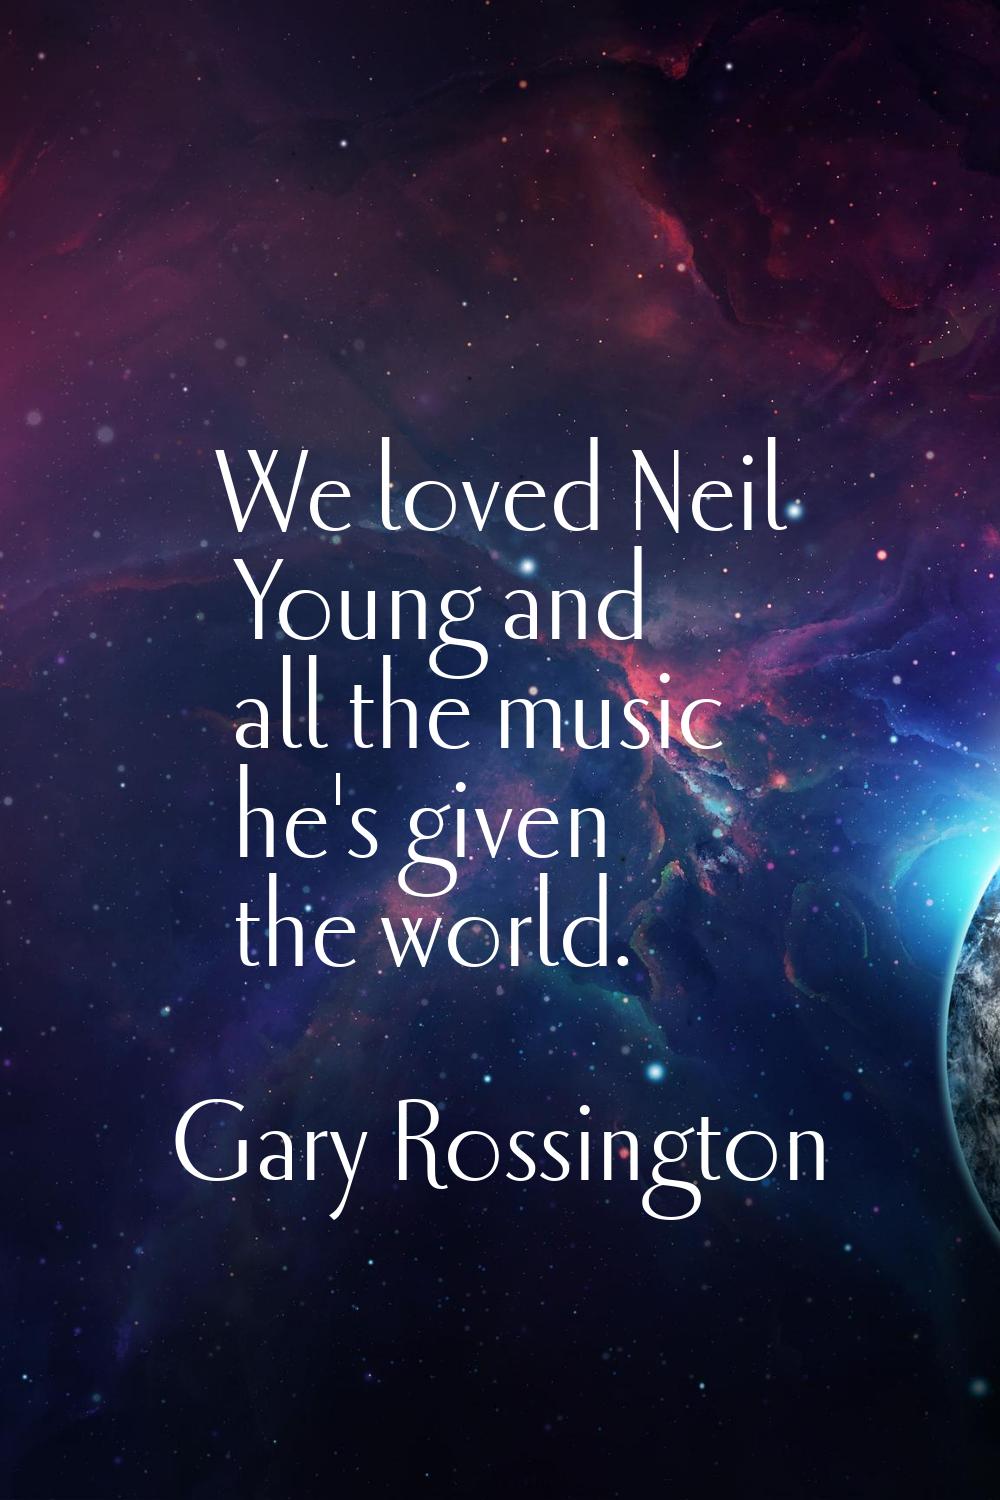 We loved Neil Young and all the music he's given the world.